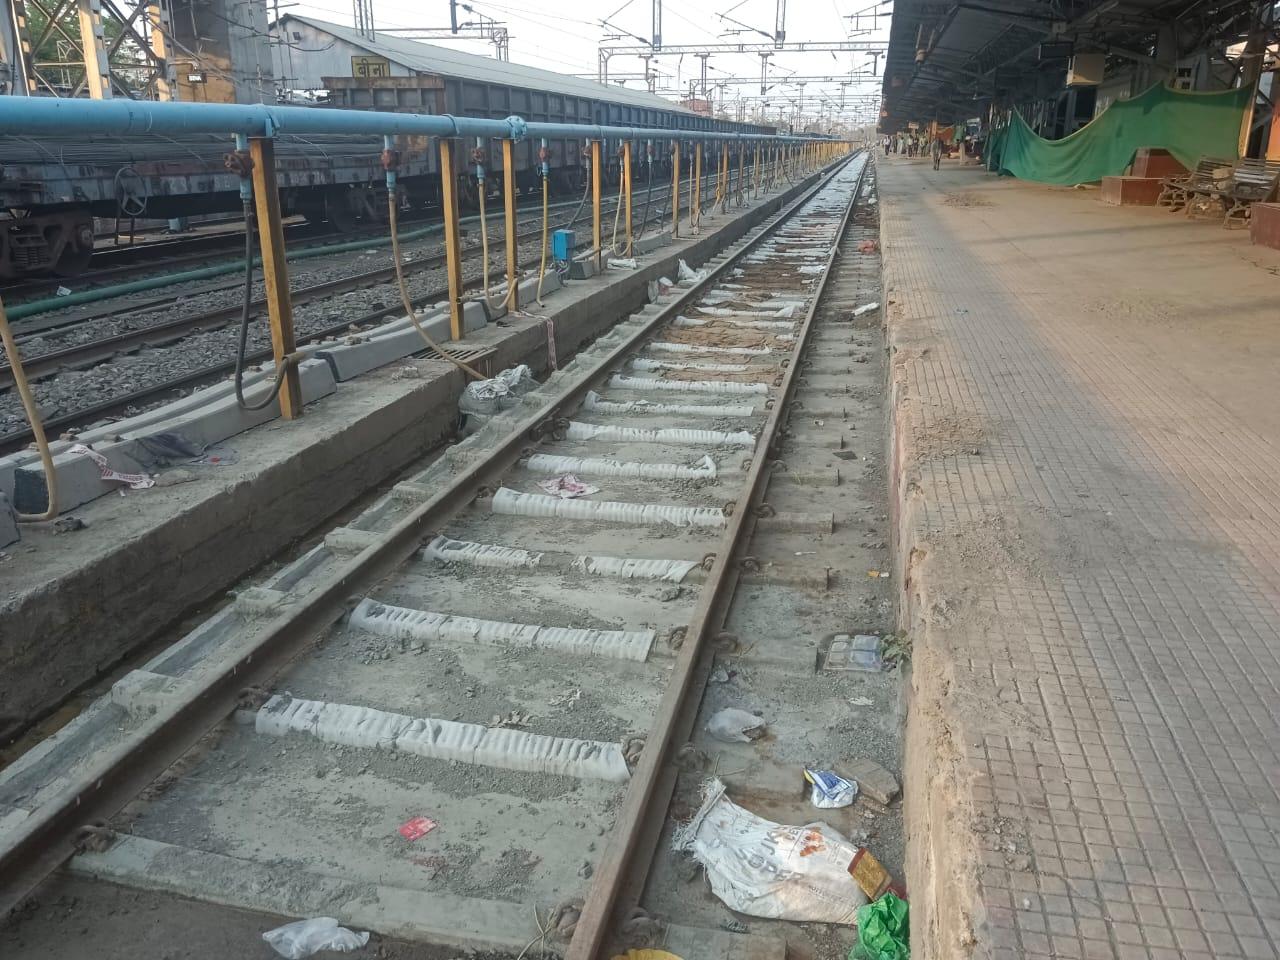 Platform number three will become operational after six days